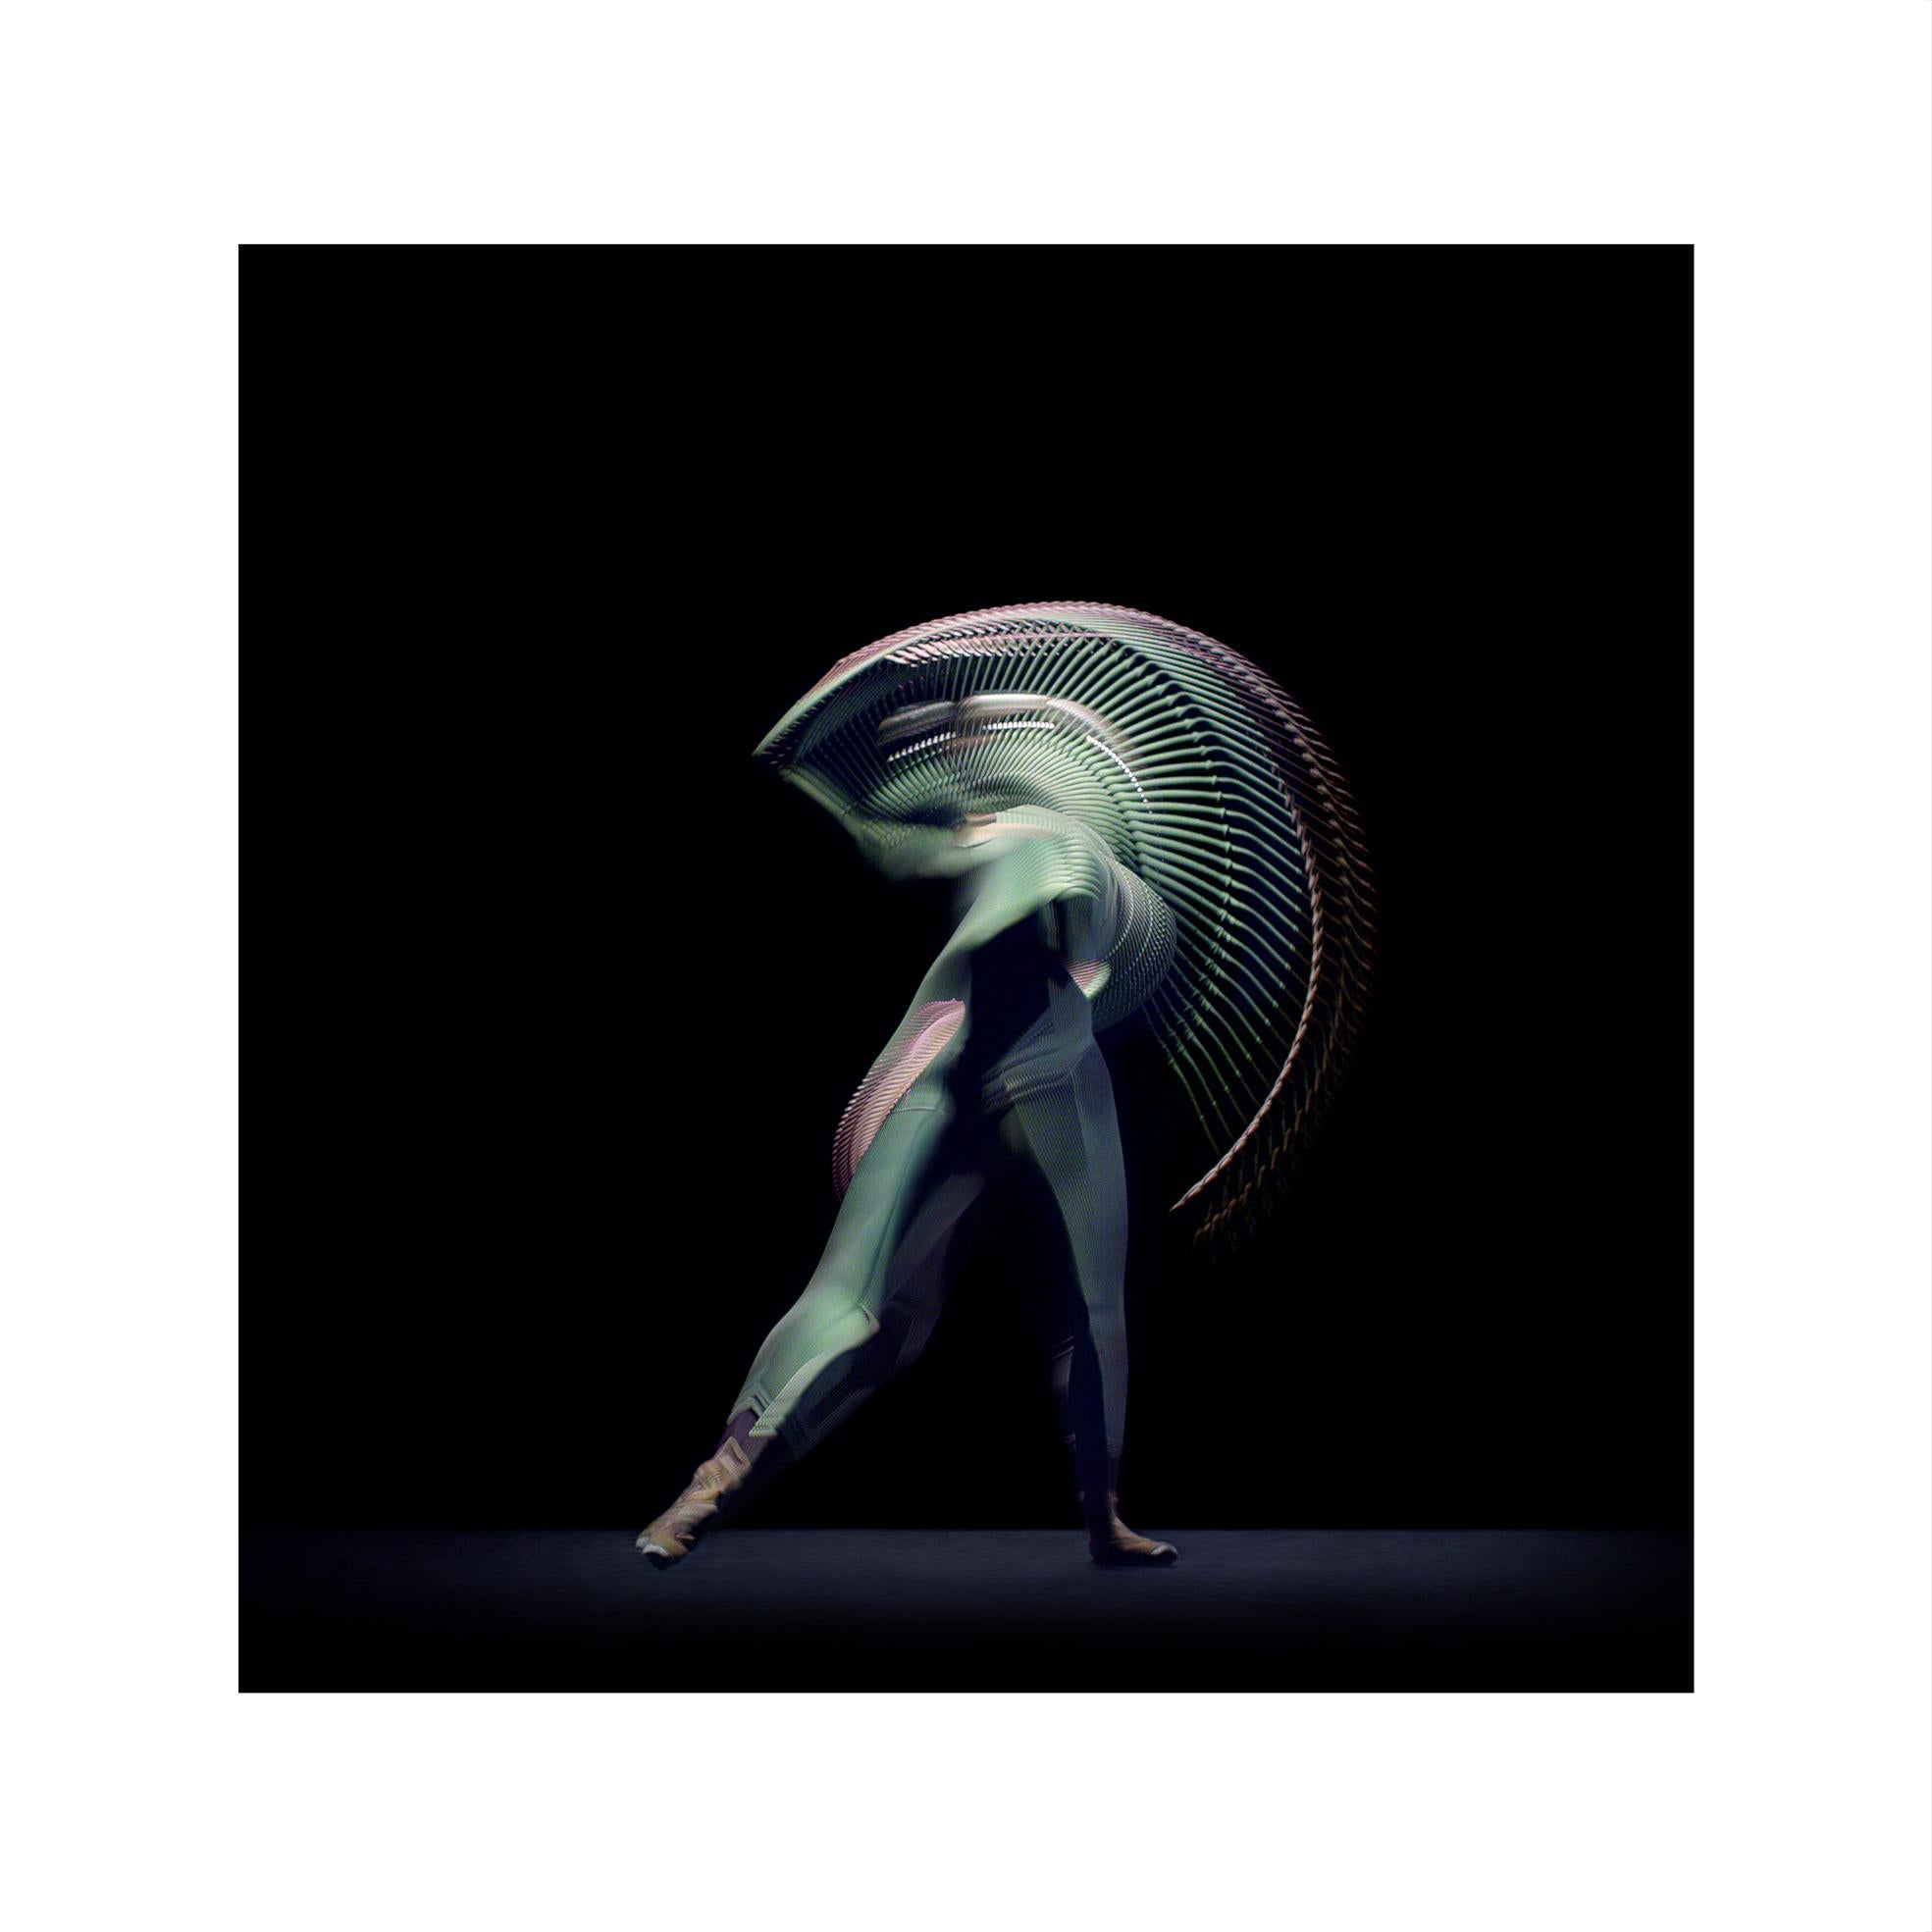 Giles Revell      Portrait Photograph - Abstract Dancers, Green 5, 2019 by Giles Revell - Photography, Print, Ballet